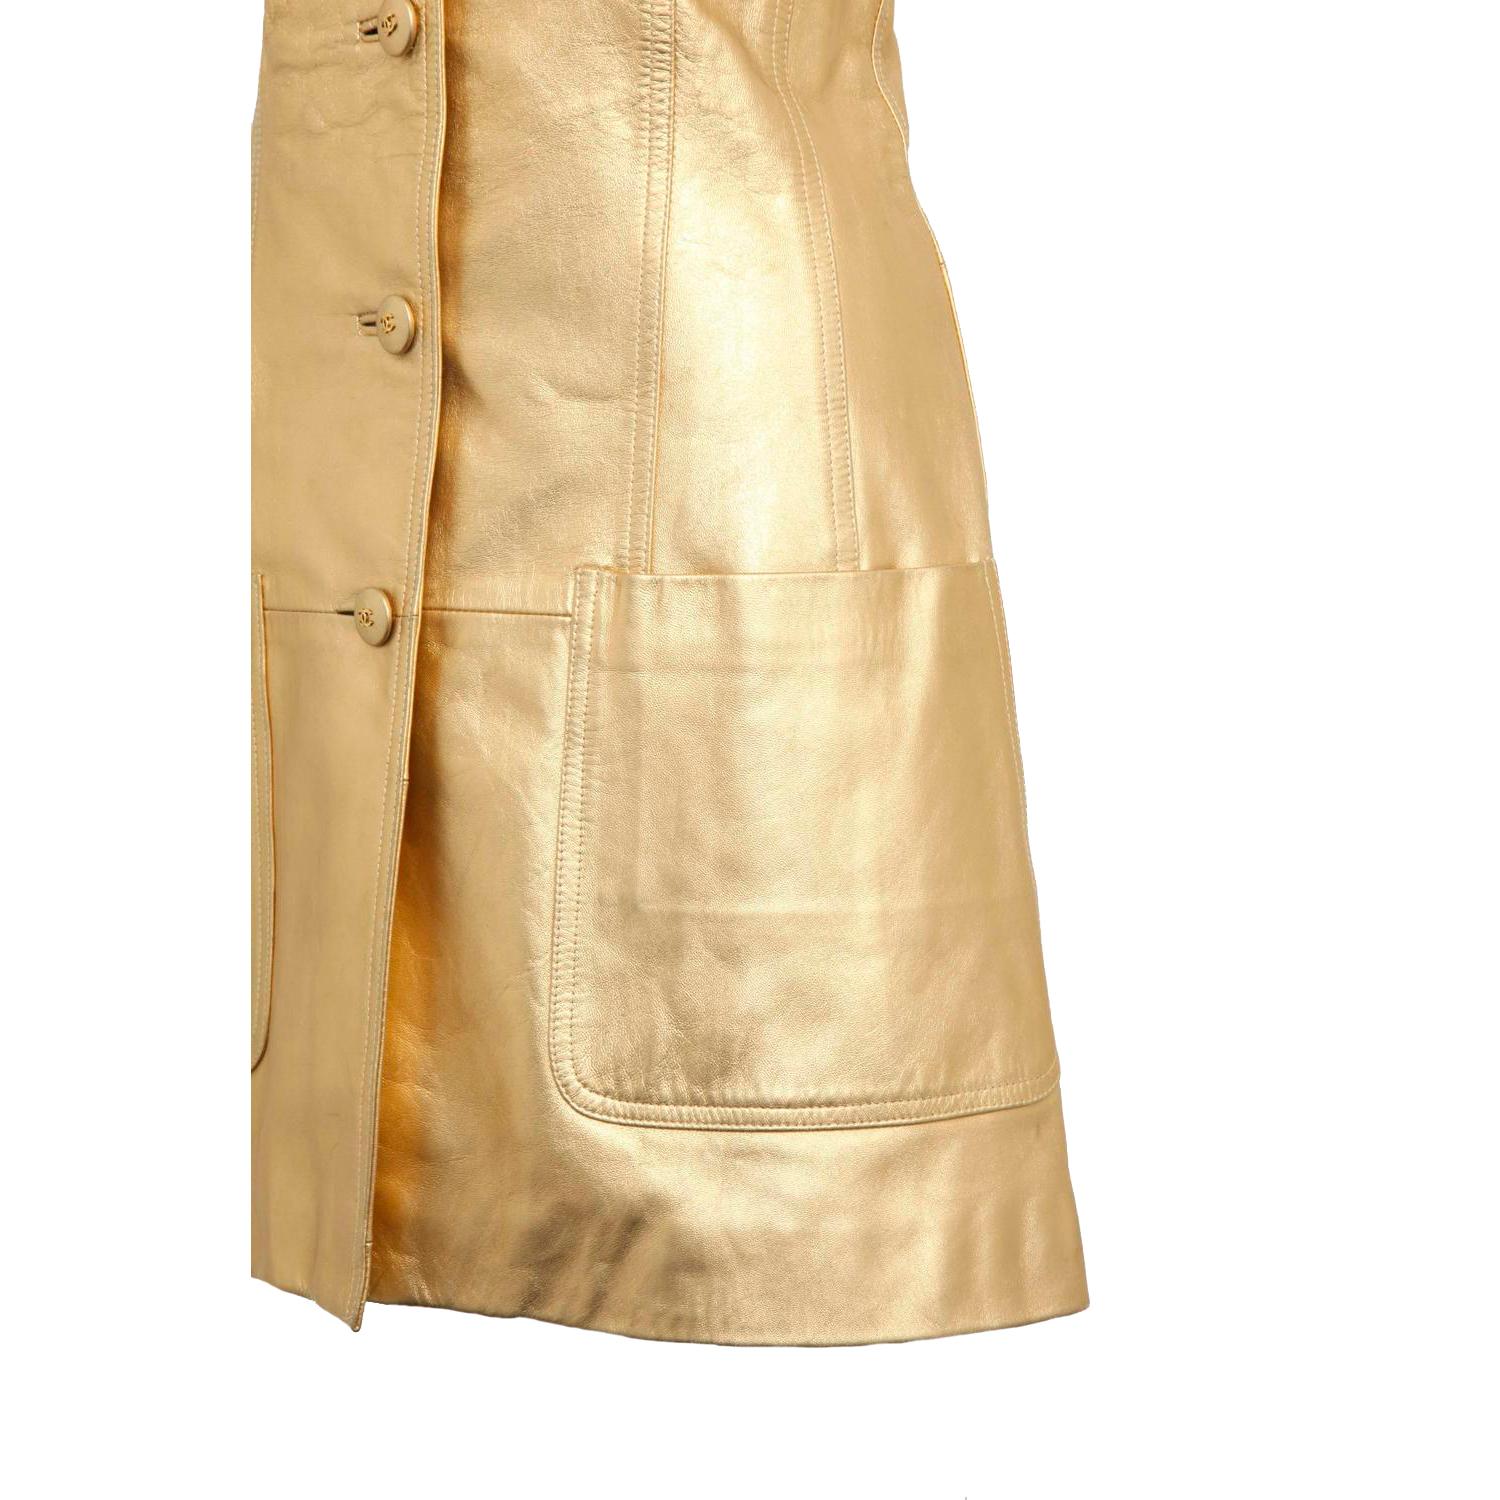 Vintage Chanel Gold Leather Dress 1994 In Excellent Condition For Sale In Hoffman Estates, IL